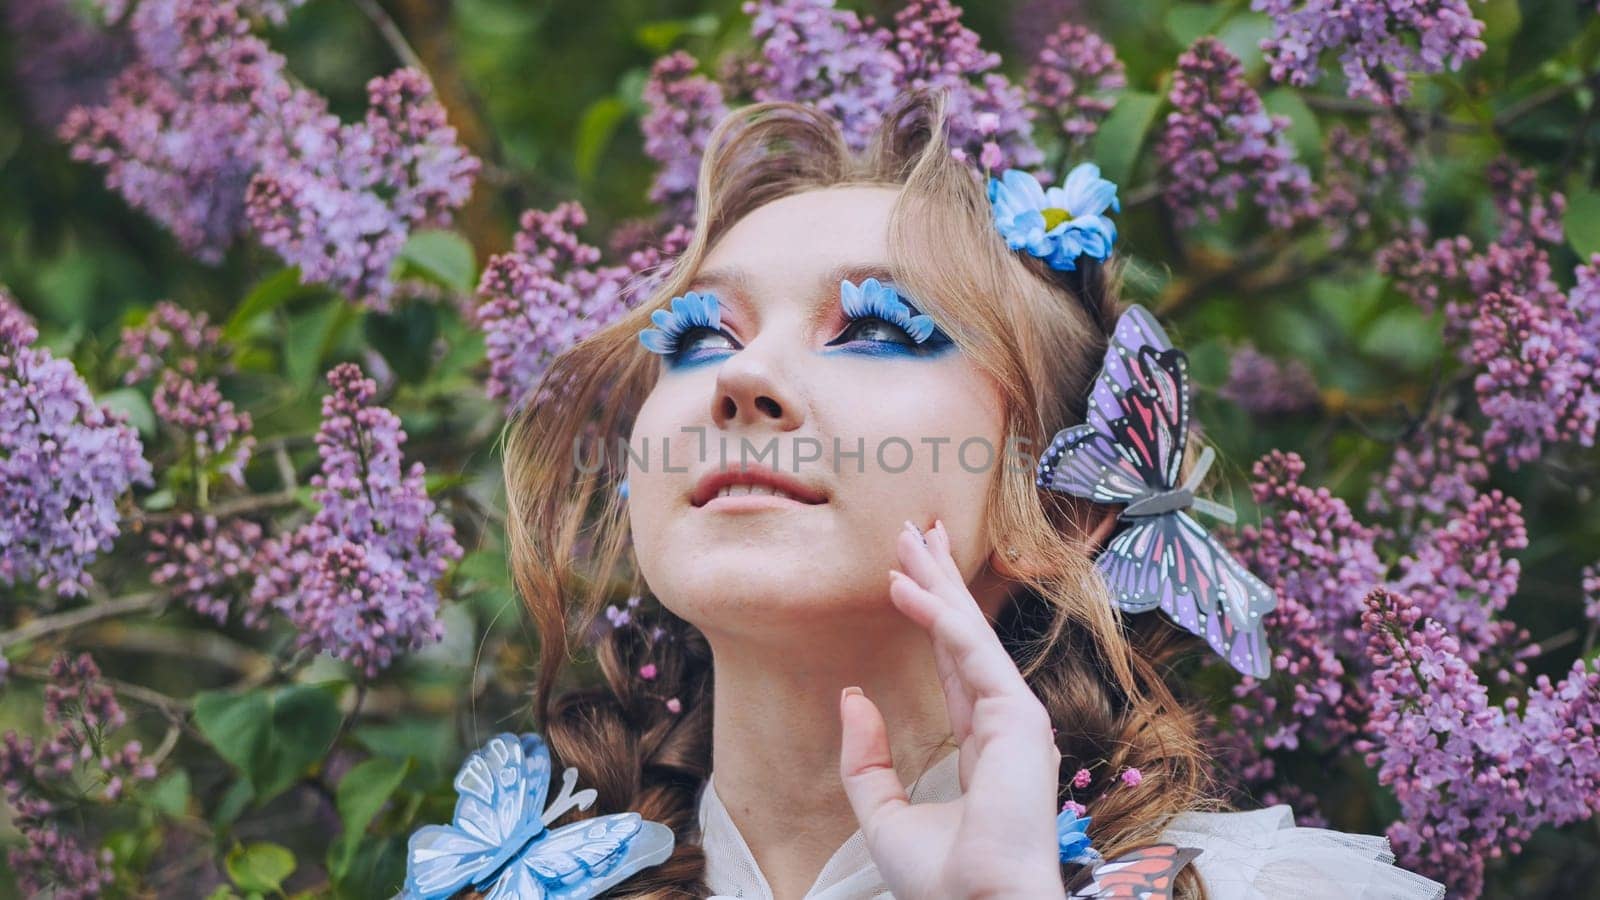 A young girl poses in lilac with a beautiful hairstyle of flowers and butterflies